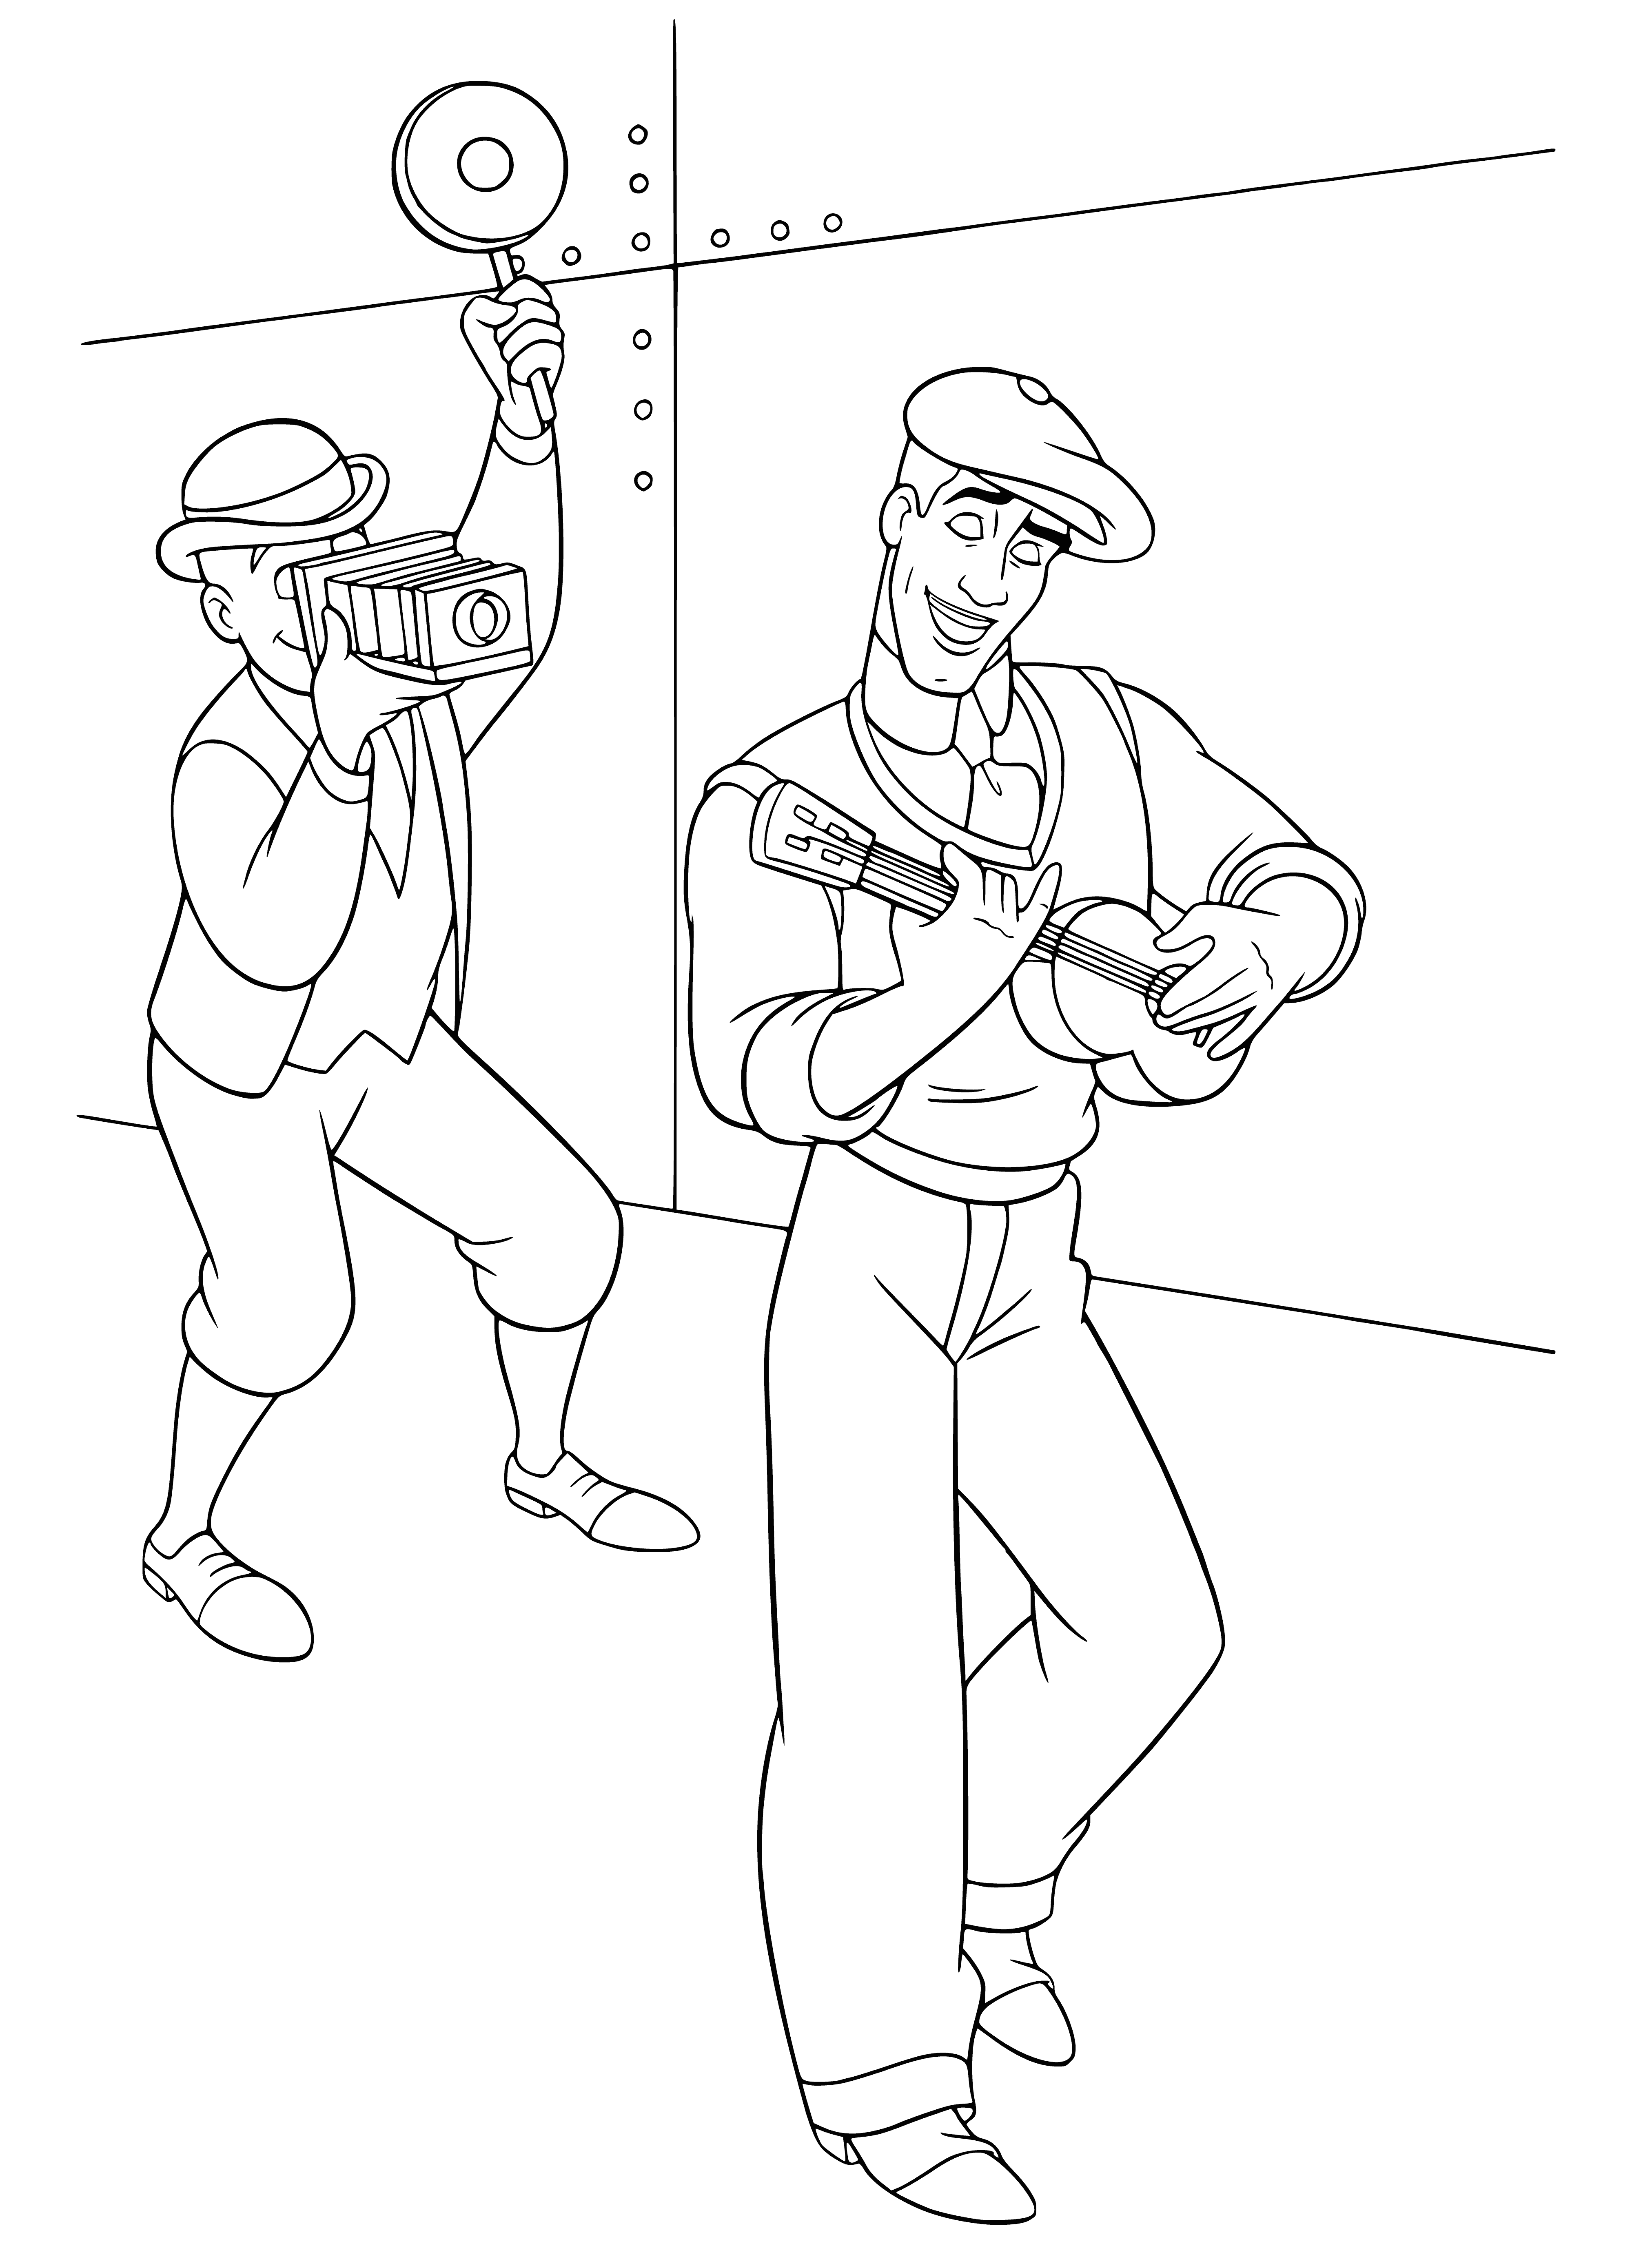 coloring page: Man with light brown skin & beard stands in center of page, wearing sleeveless tunic & light brown leggings. Holds small, dark brown frog in left hand.